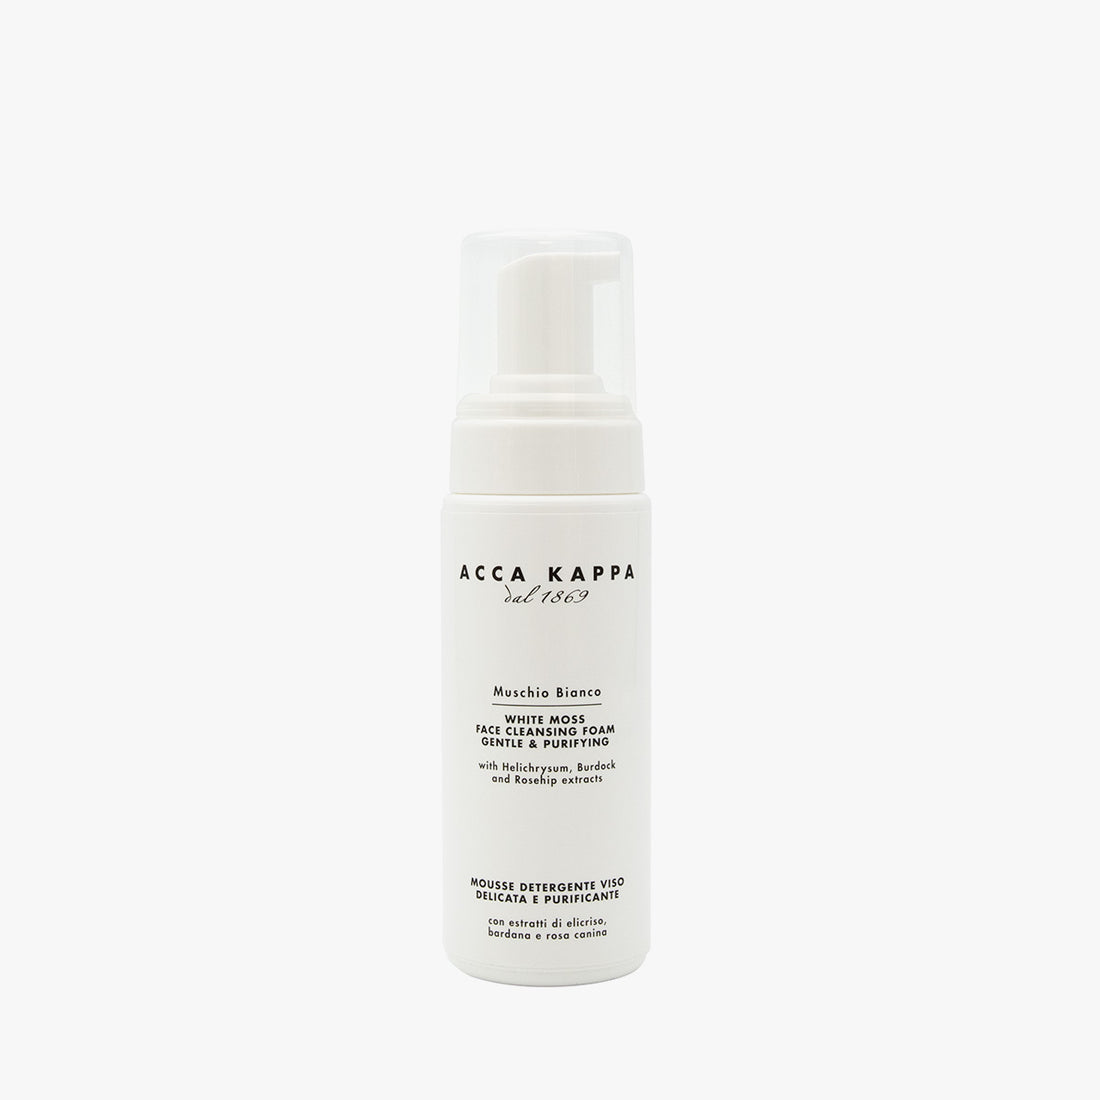 ACCA KAPPA White Moss Face Cleanser (200ml)